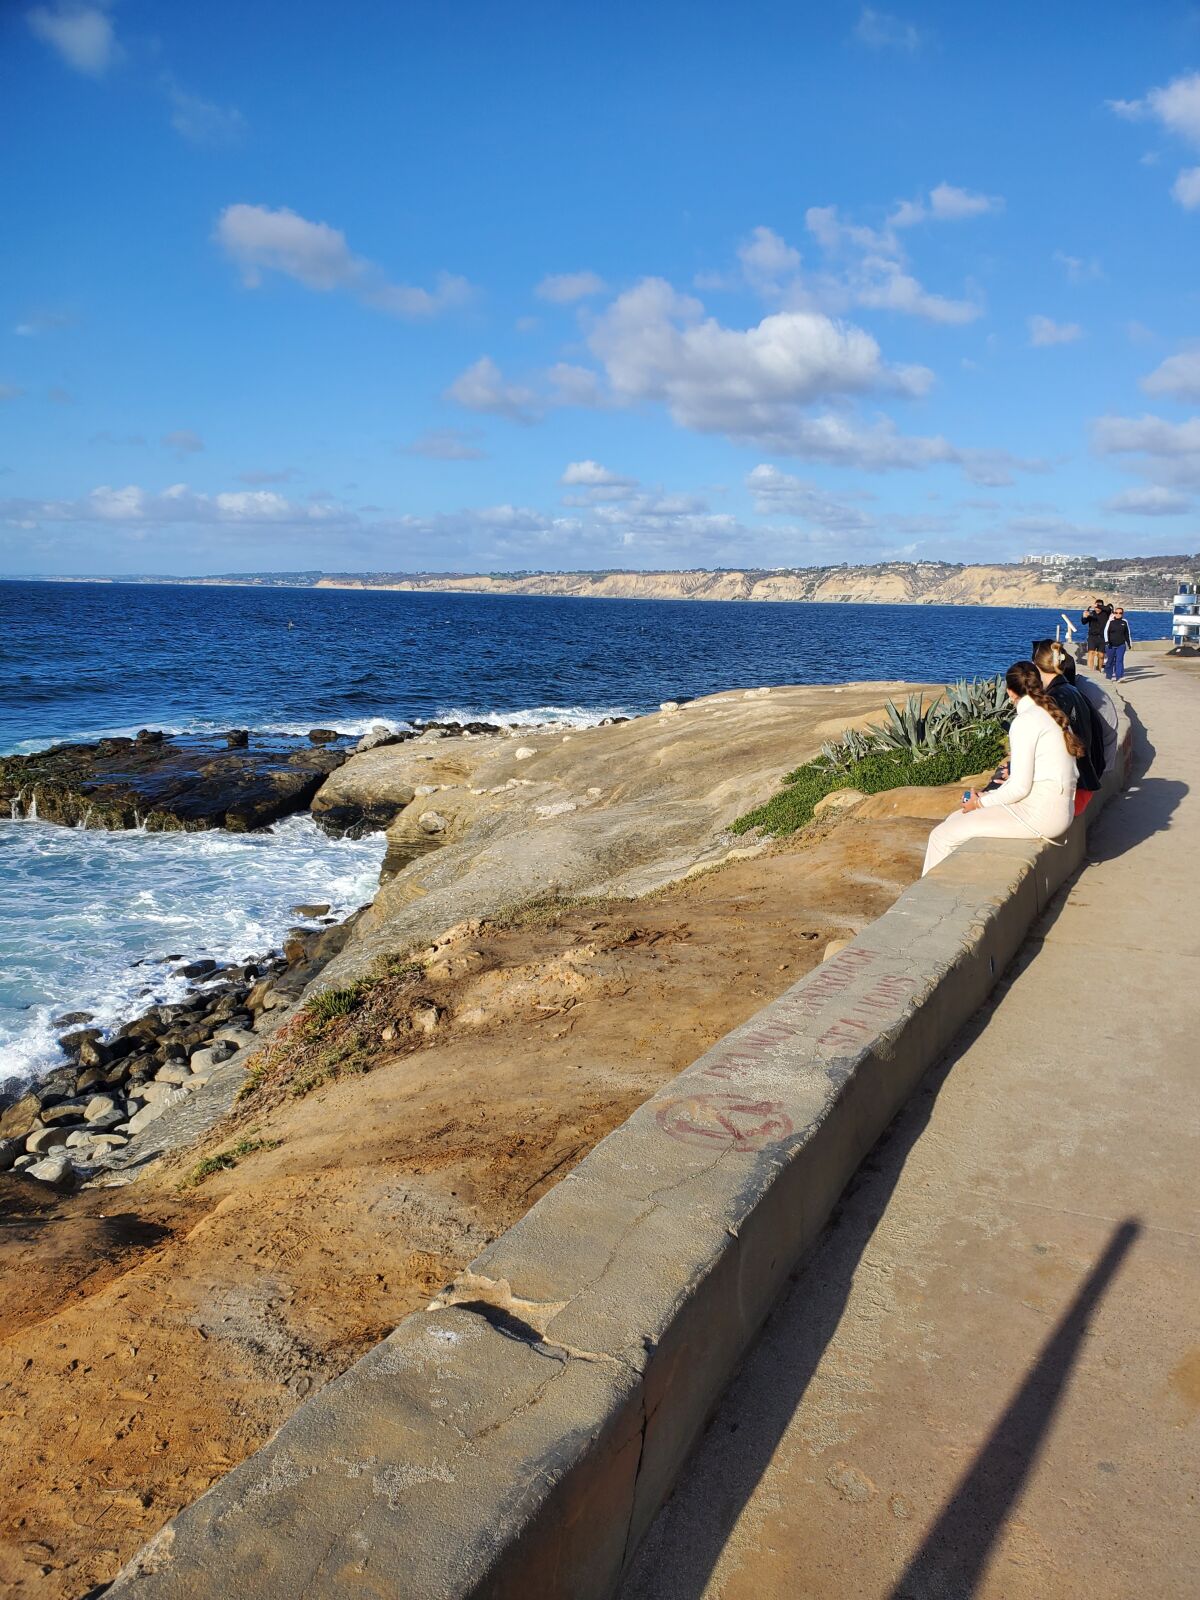 Point La Jolla is again open to the public, but not many people were walking on the bluffs the afternoon of Nov. 2.